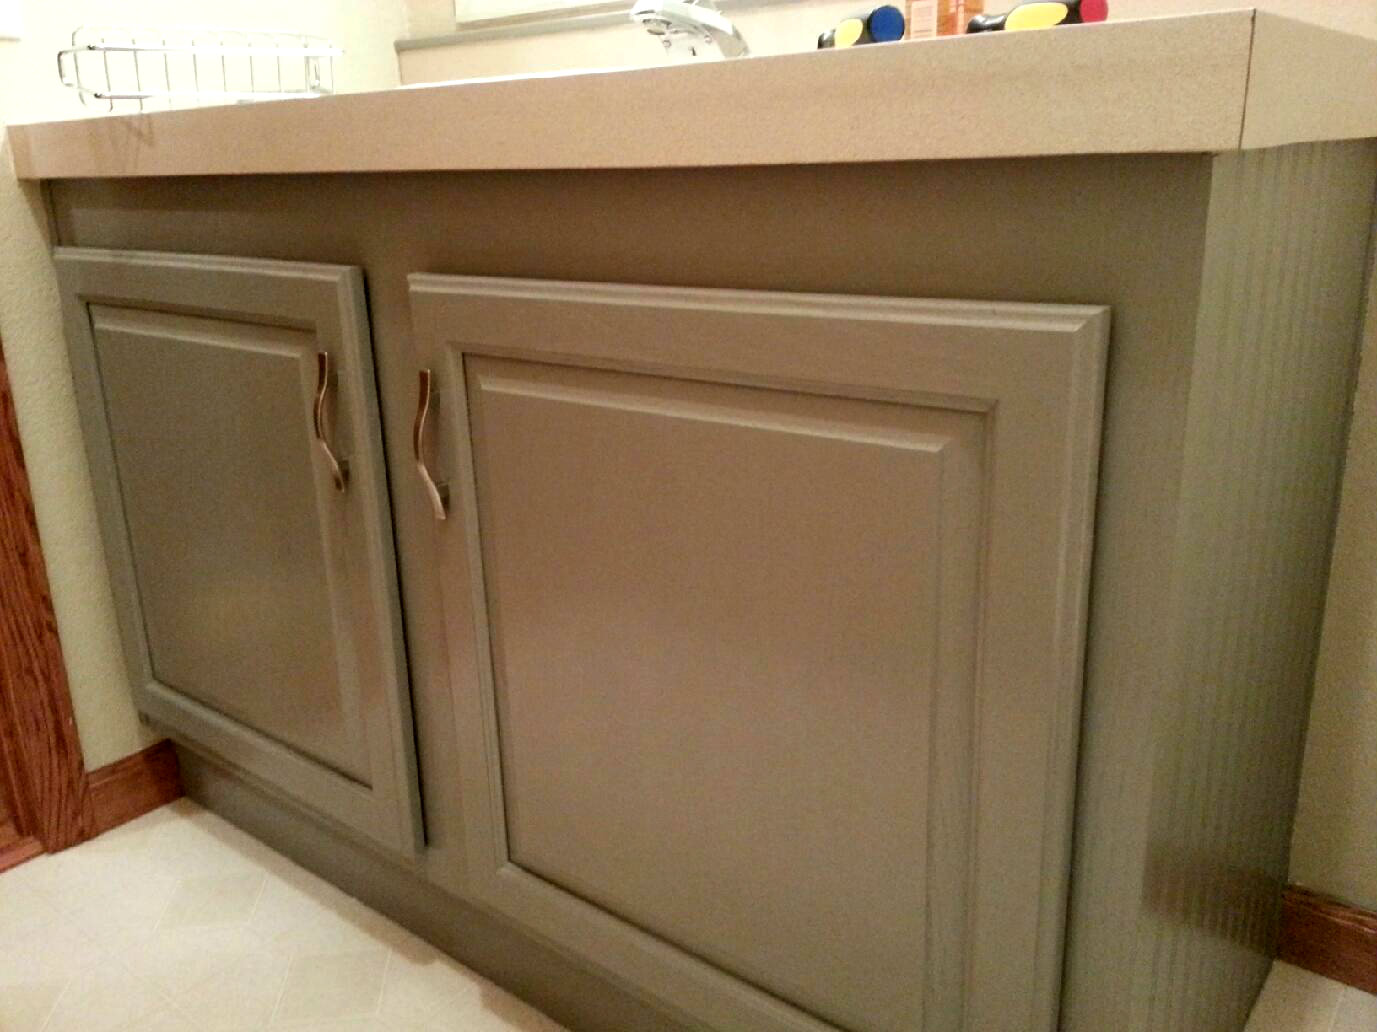 Like so many of our vanities, the fronts are solid wood, but the ...